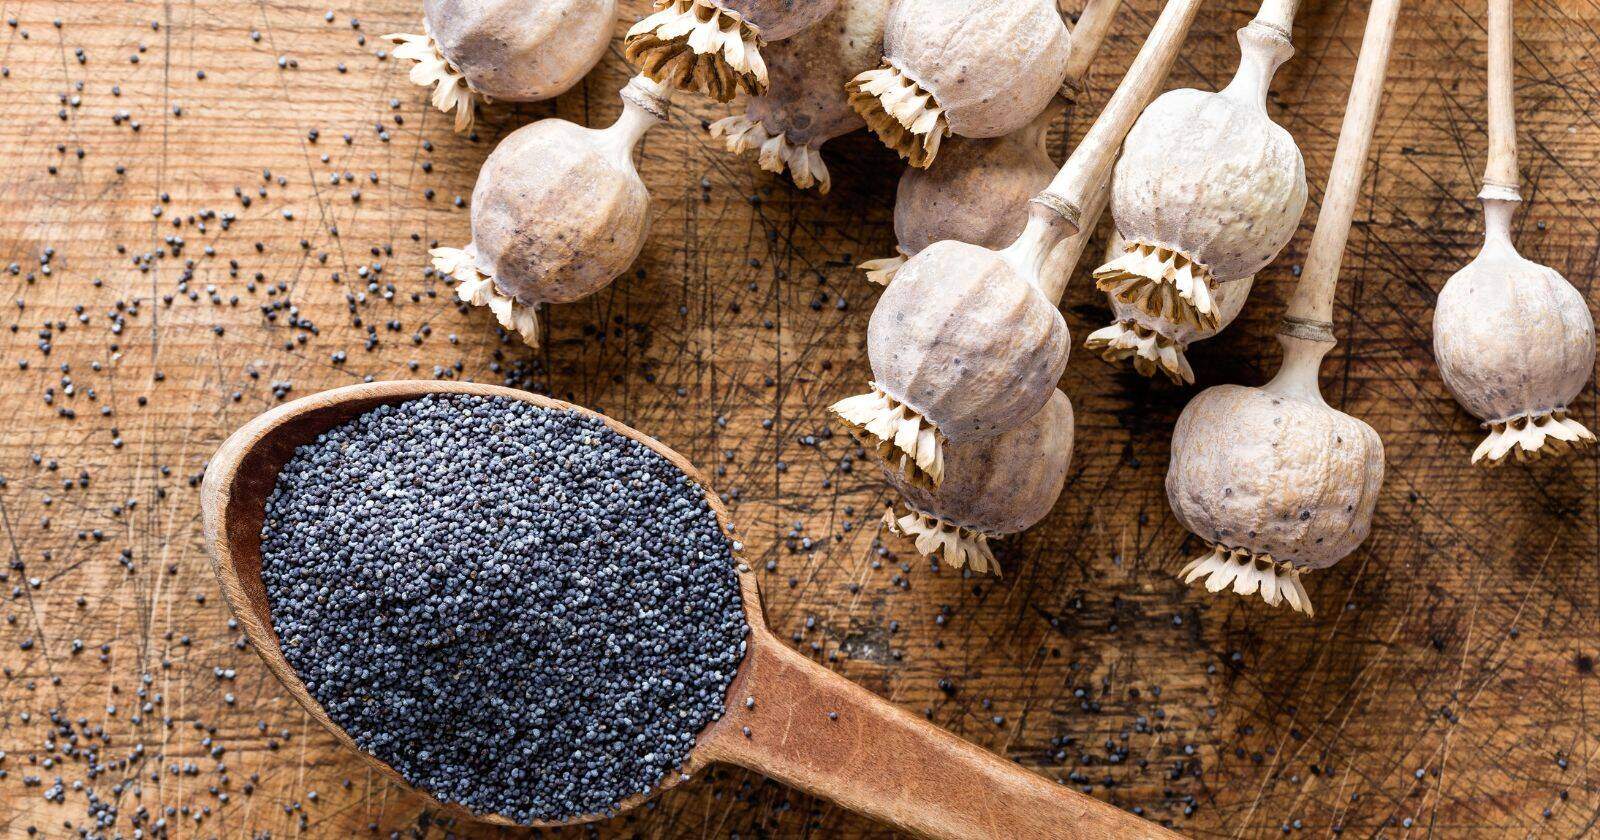 Where Does Poppy Seed Come From